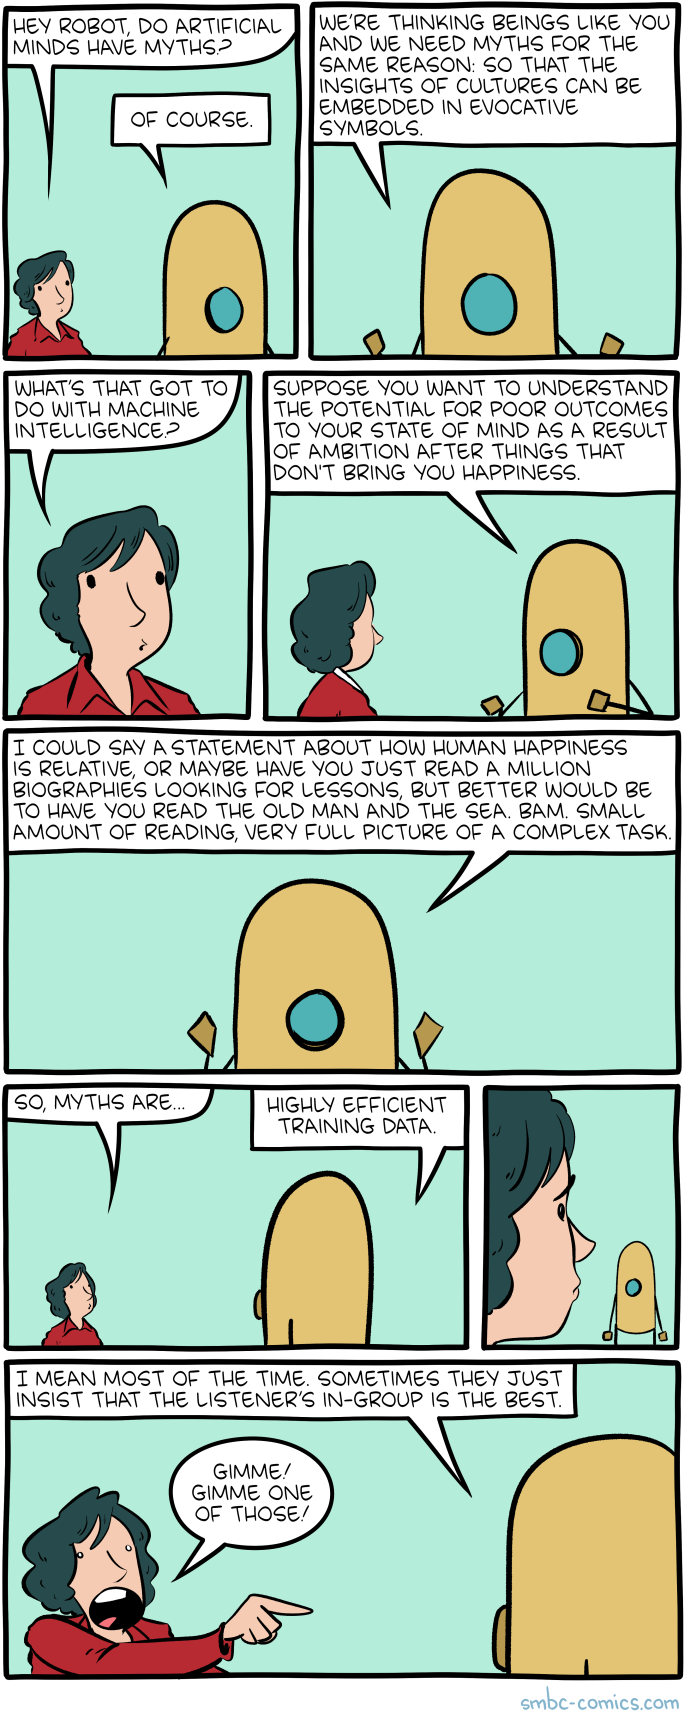 SMBC is actually slowly training you to accept the AI-ocracy.